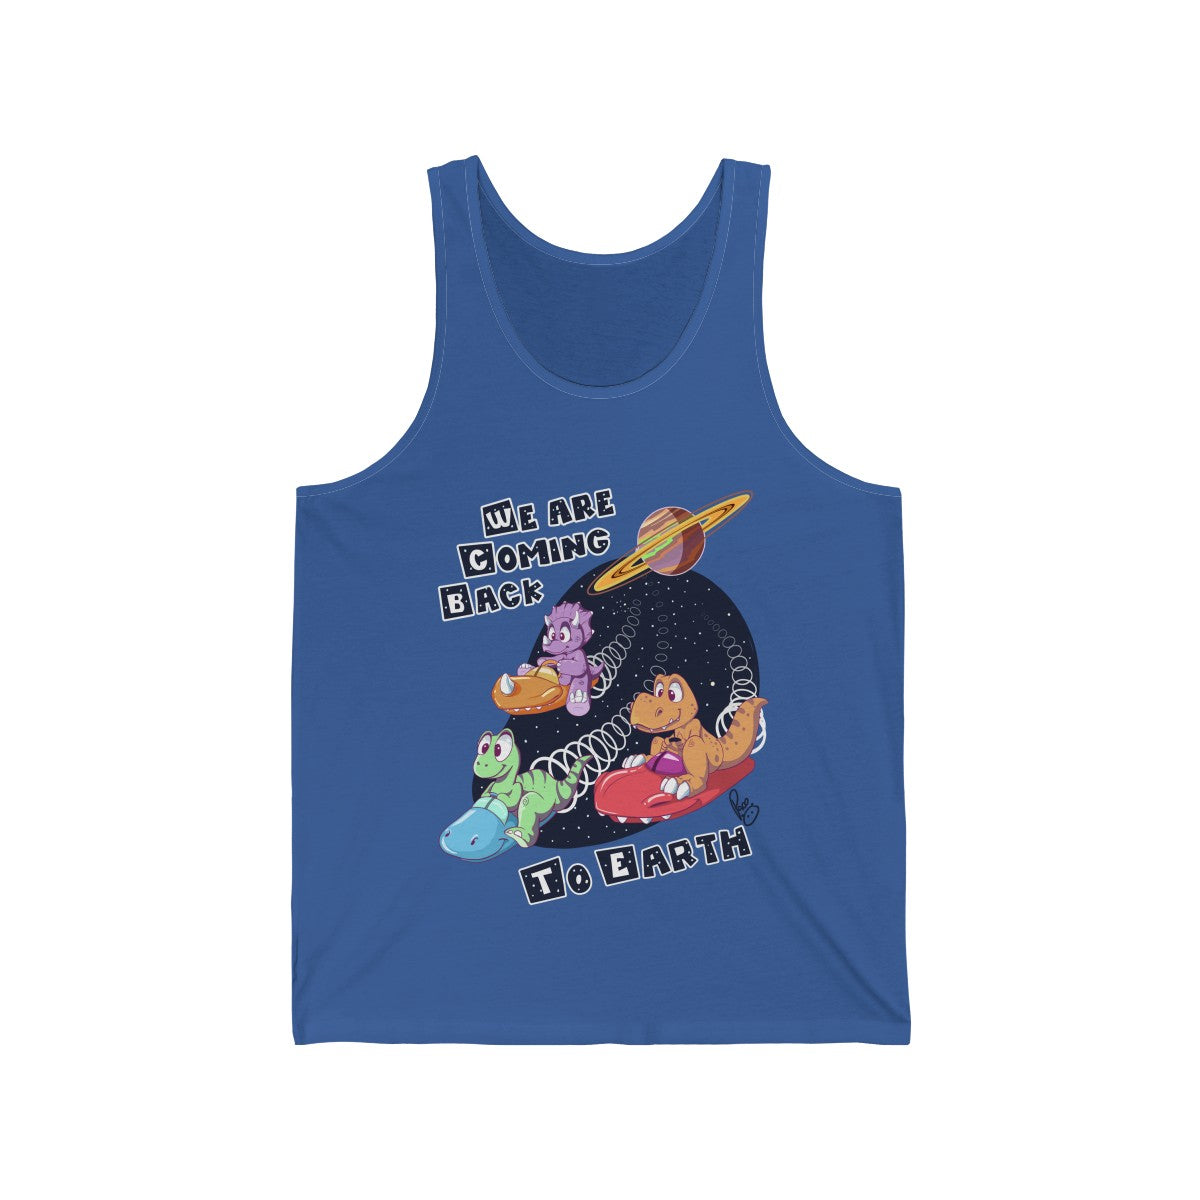 We are coming back to Earth - Tank Top Tank Top Paco Panda Royal Blue XS 